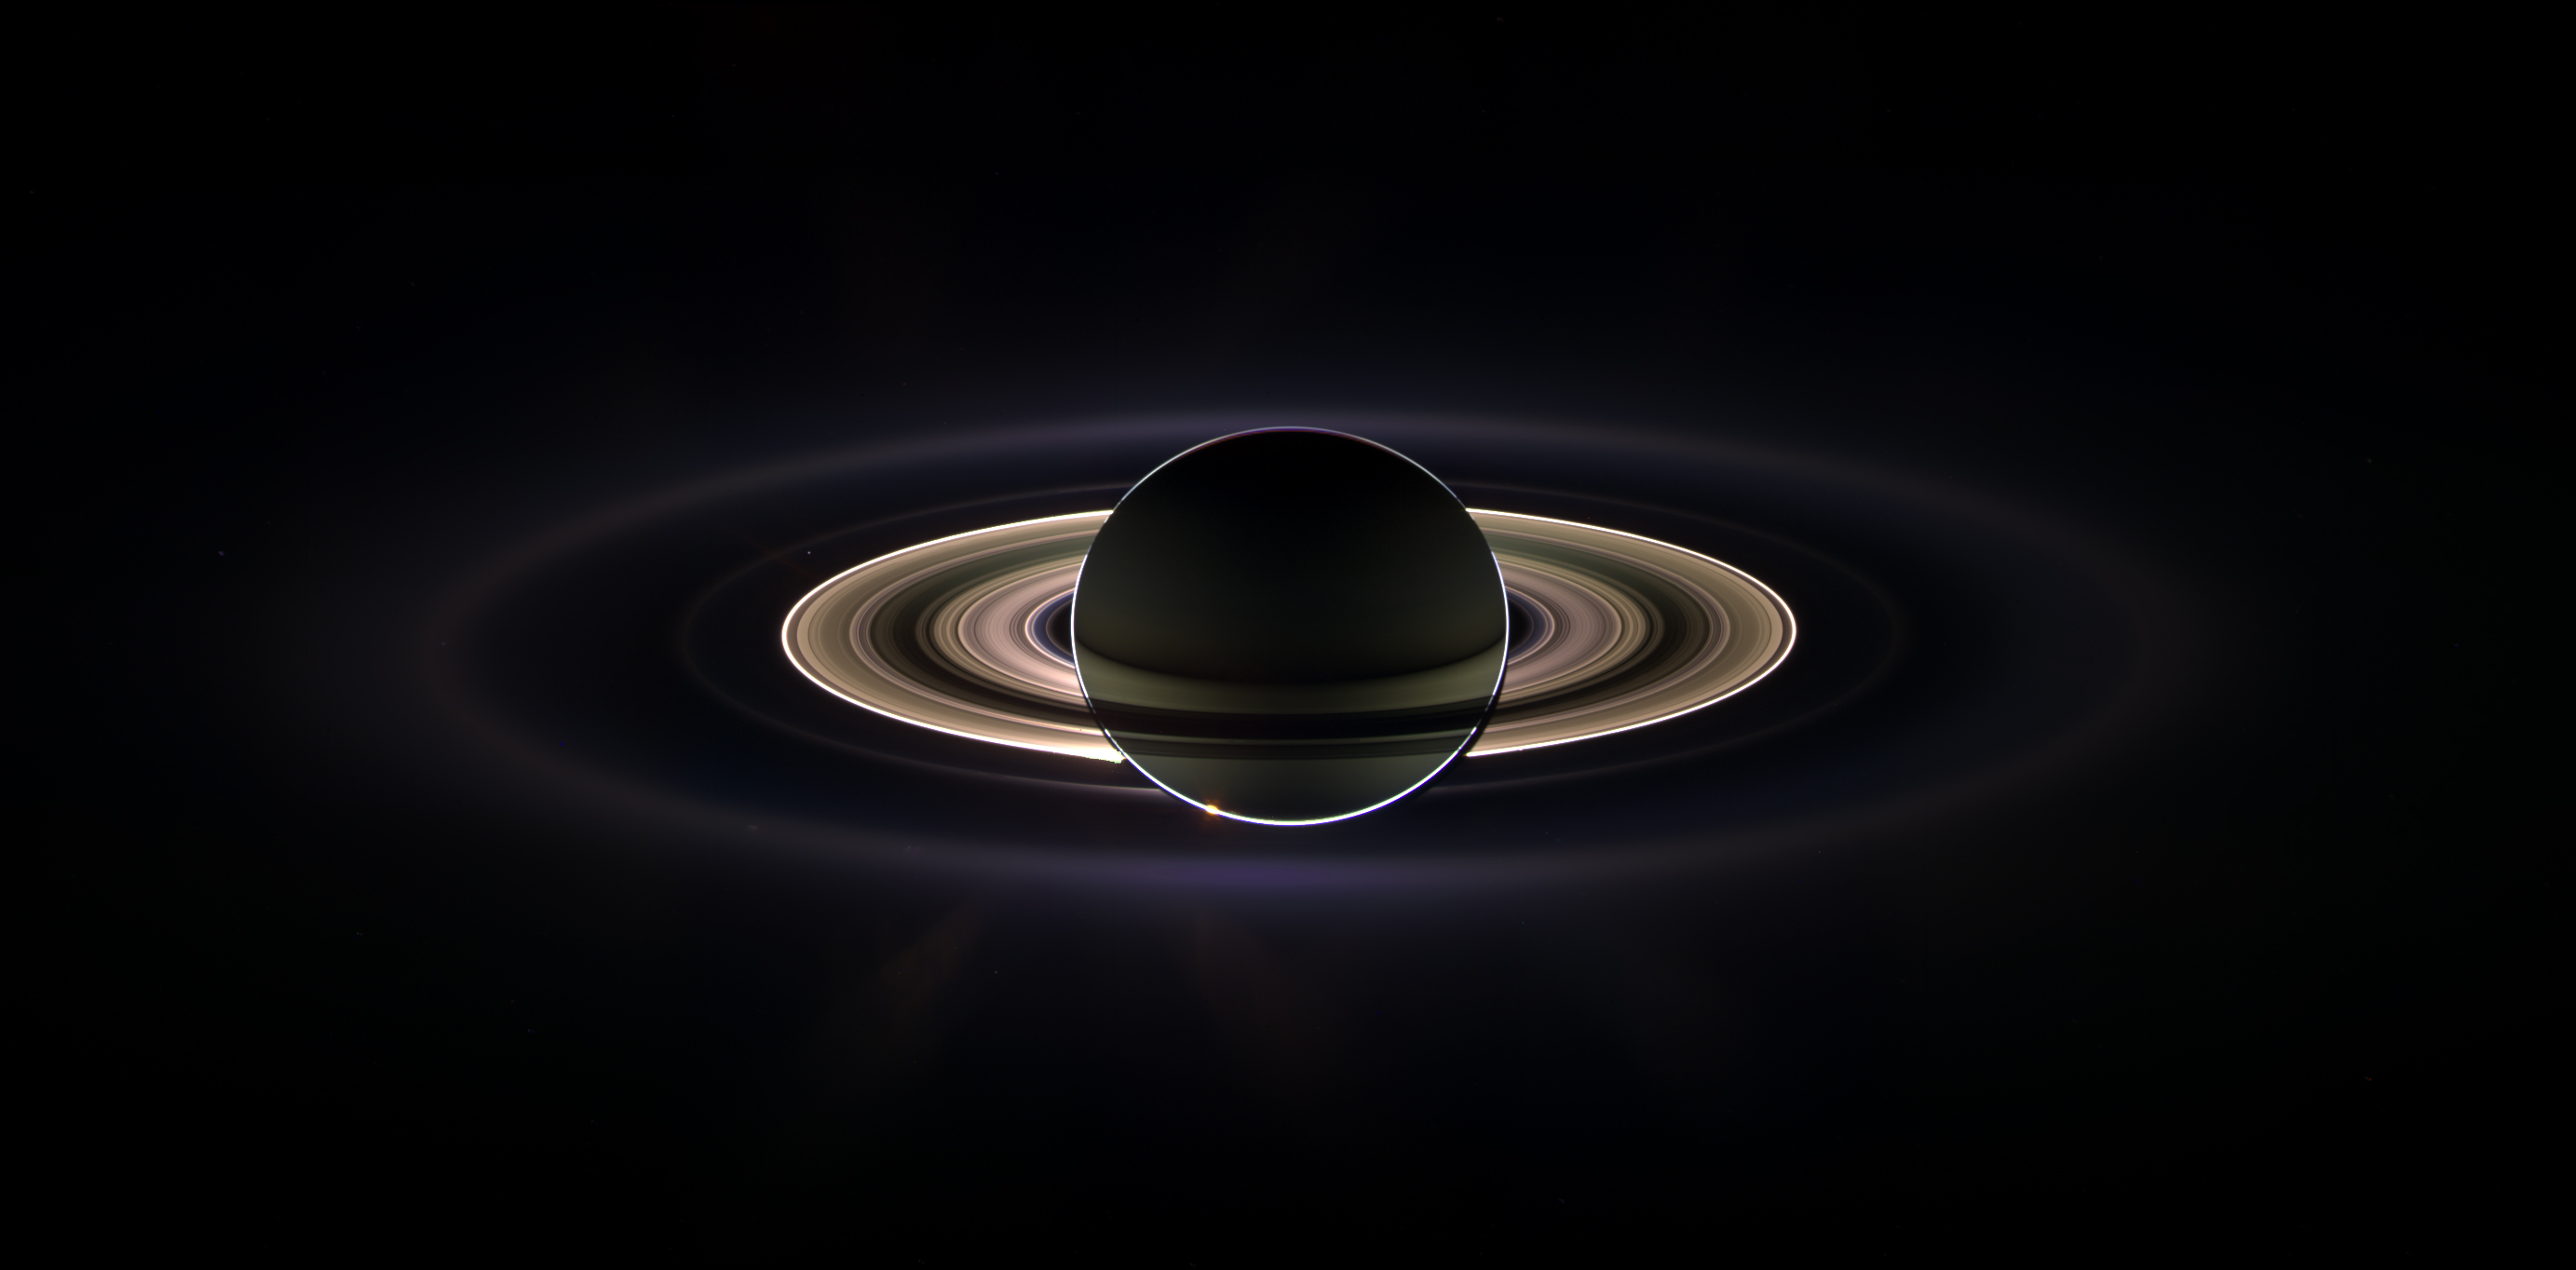 Eclipse of the Sun by Saturn